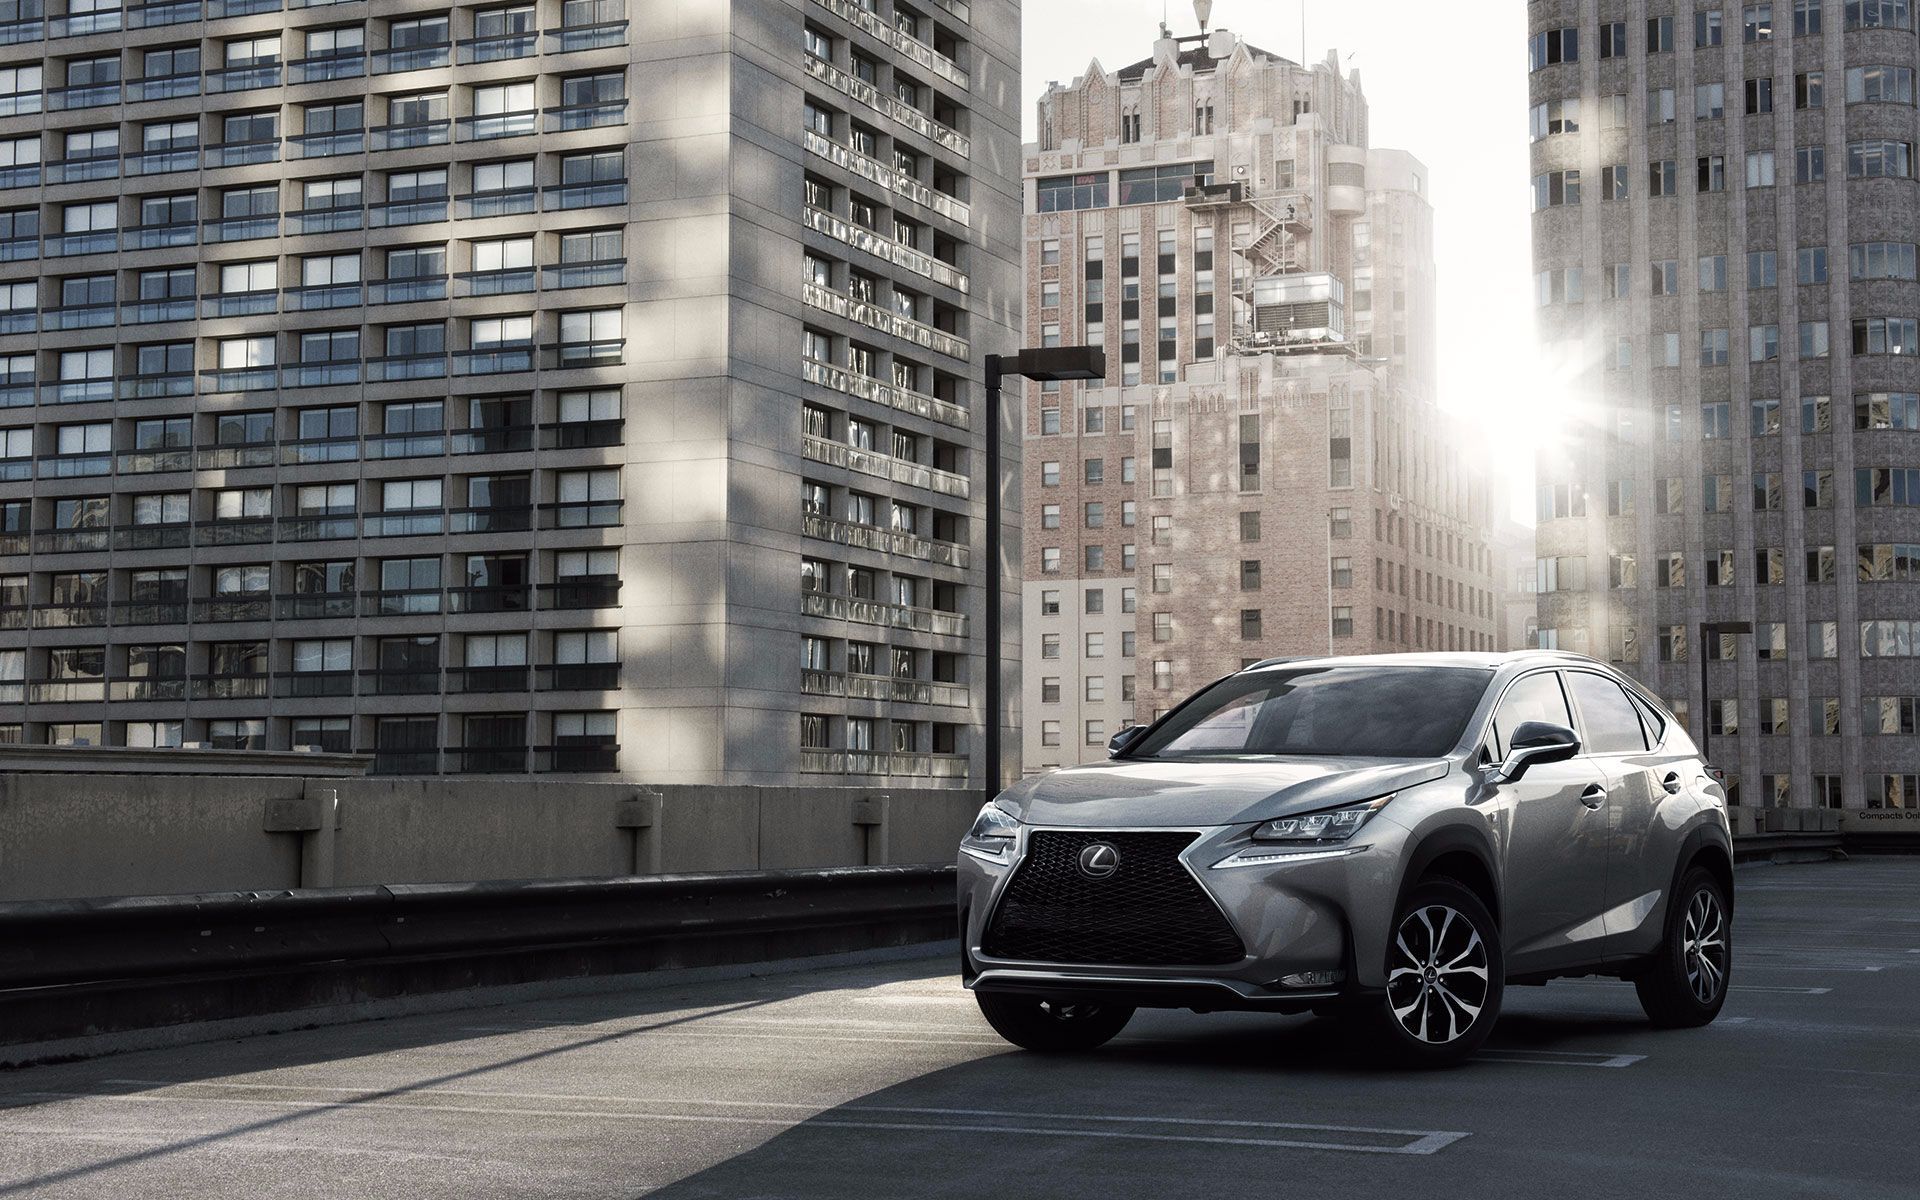 2017 Lexus NX: Luxury in a Compact Size